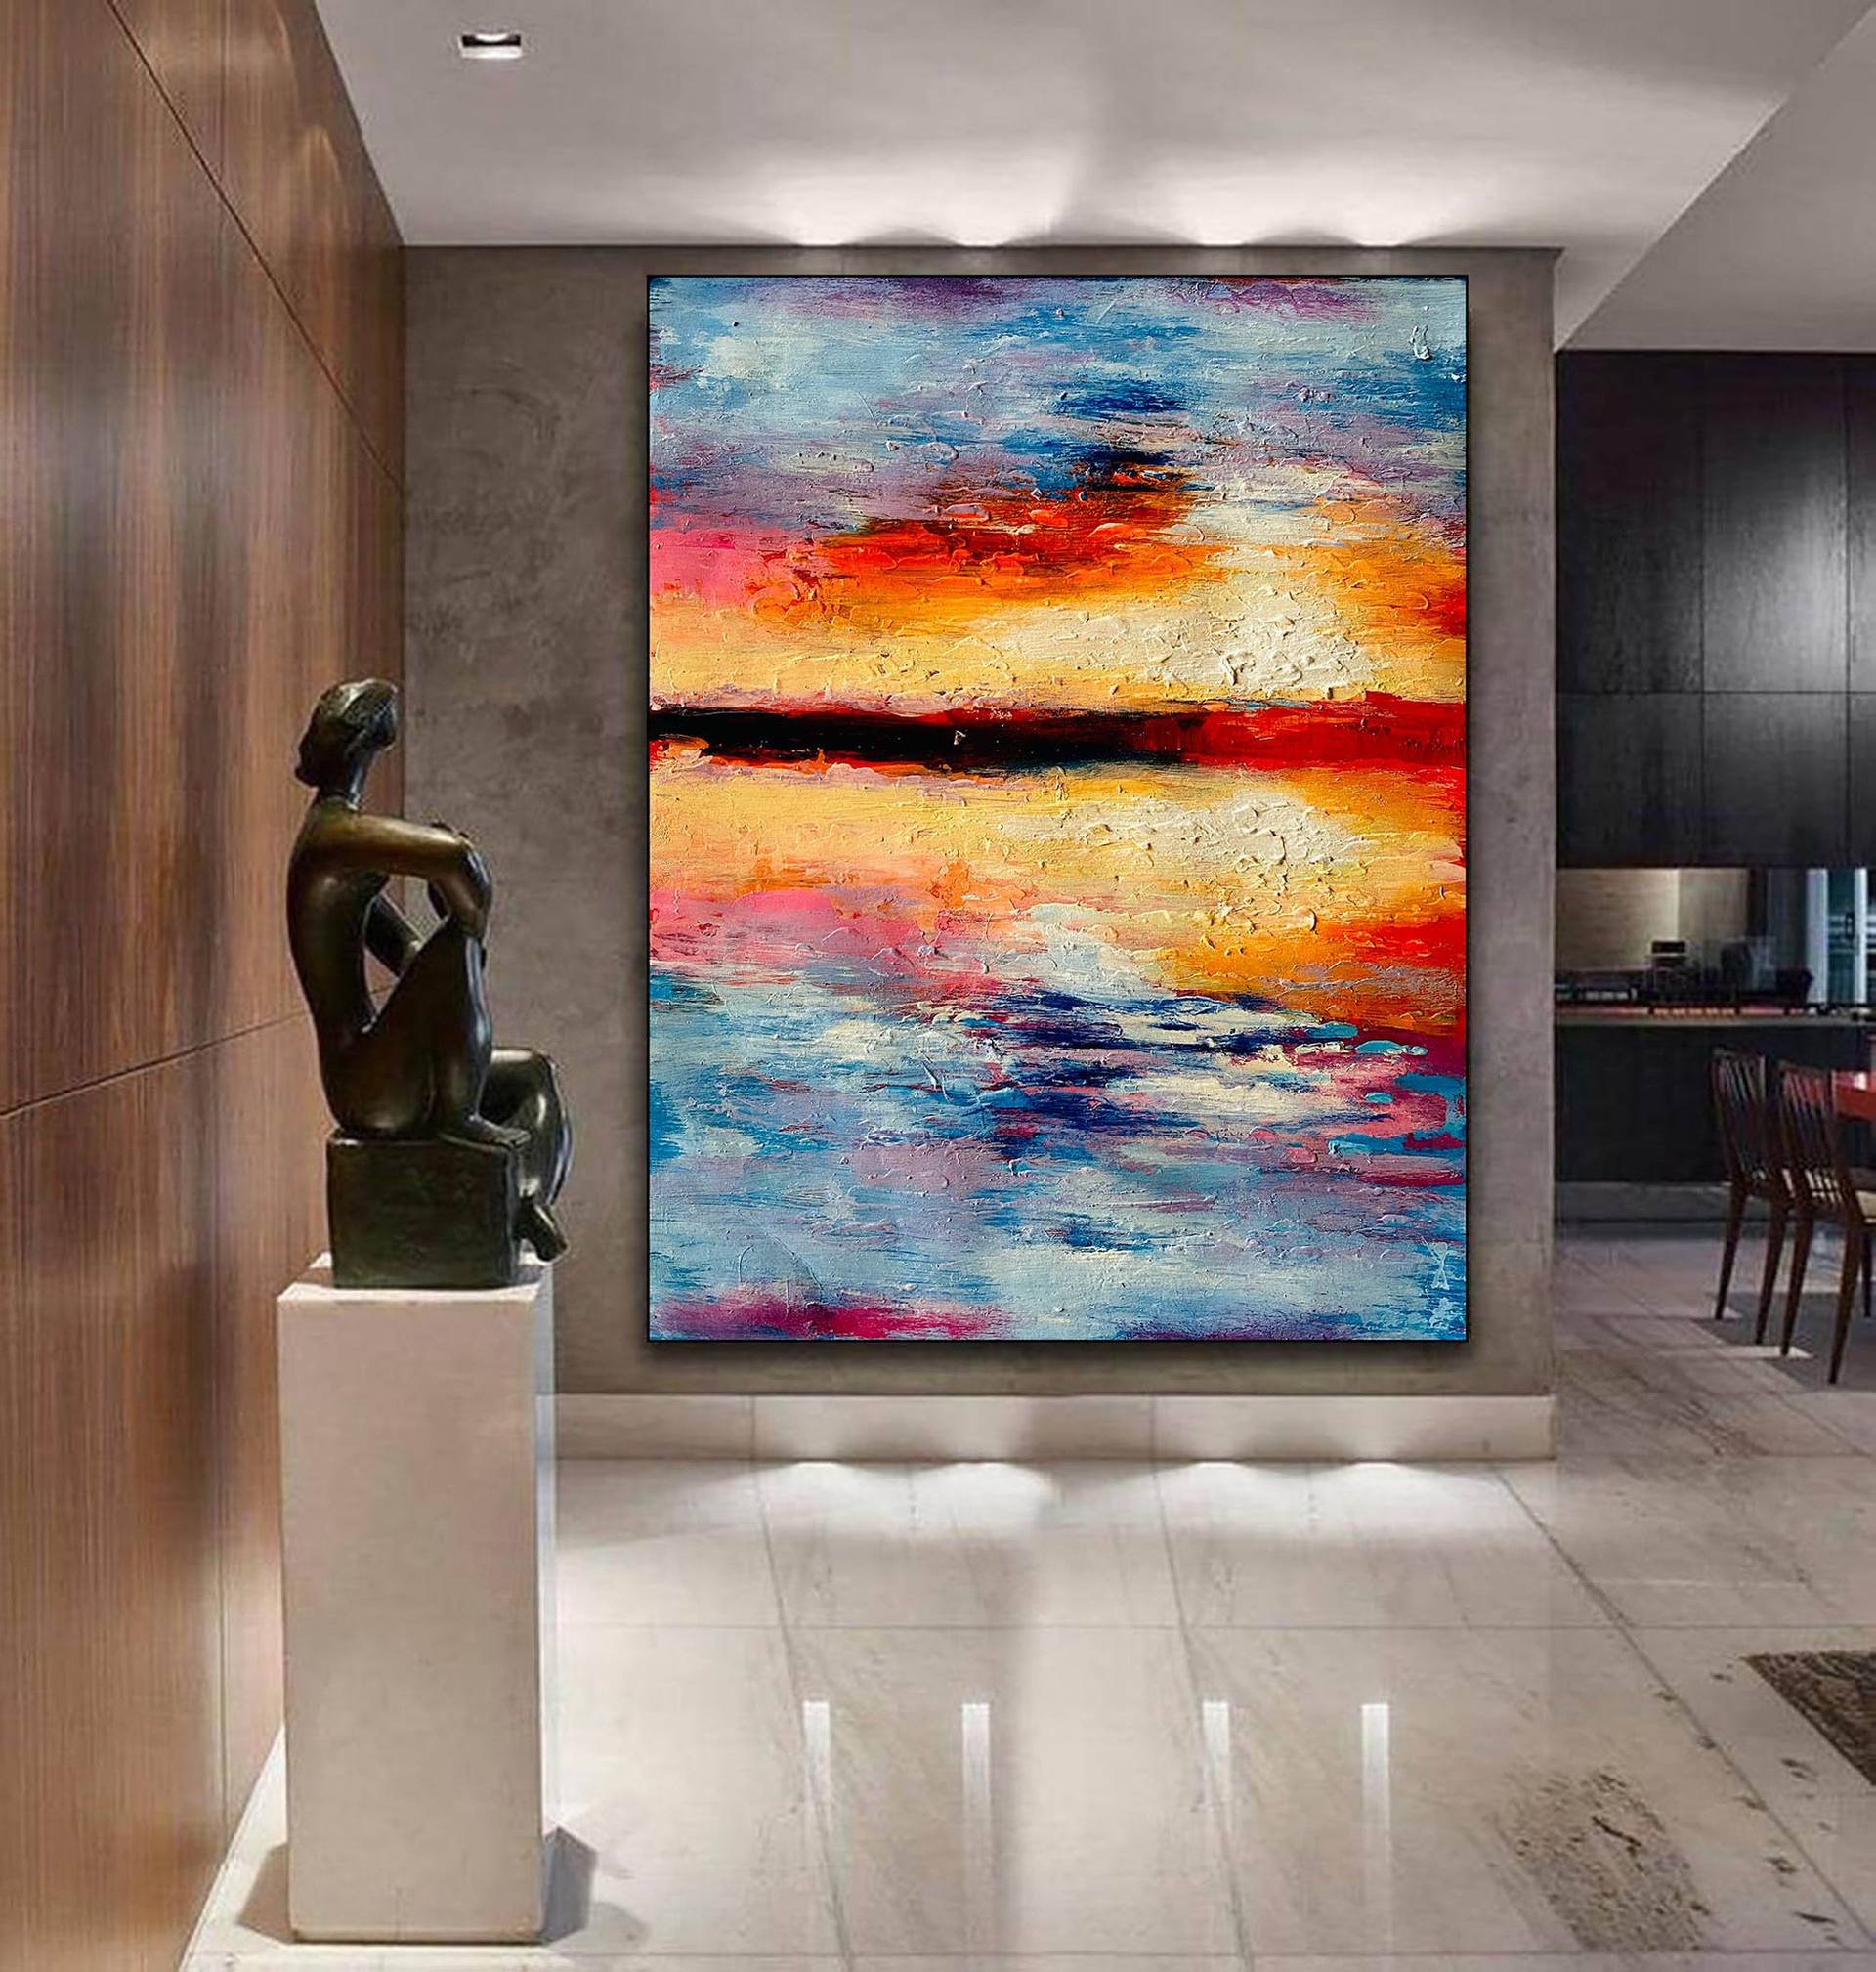 Wall Decor, Abstract Painting, Modern Room Decor, Wall Hangings, Unique Wall  Art, Original Artwork, Extra Large Wall Art, office decor LV-057 Painting  by Kal Soom